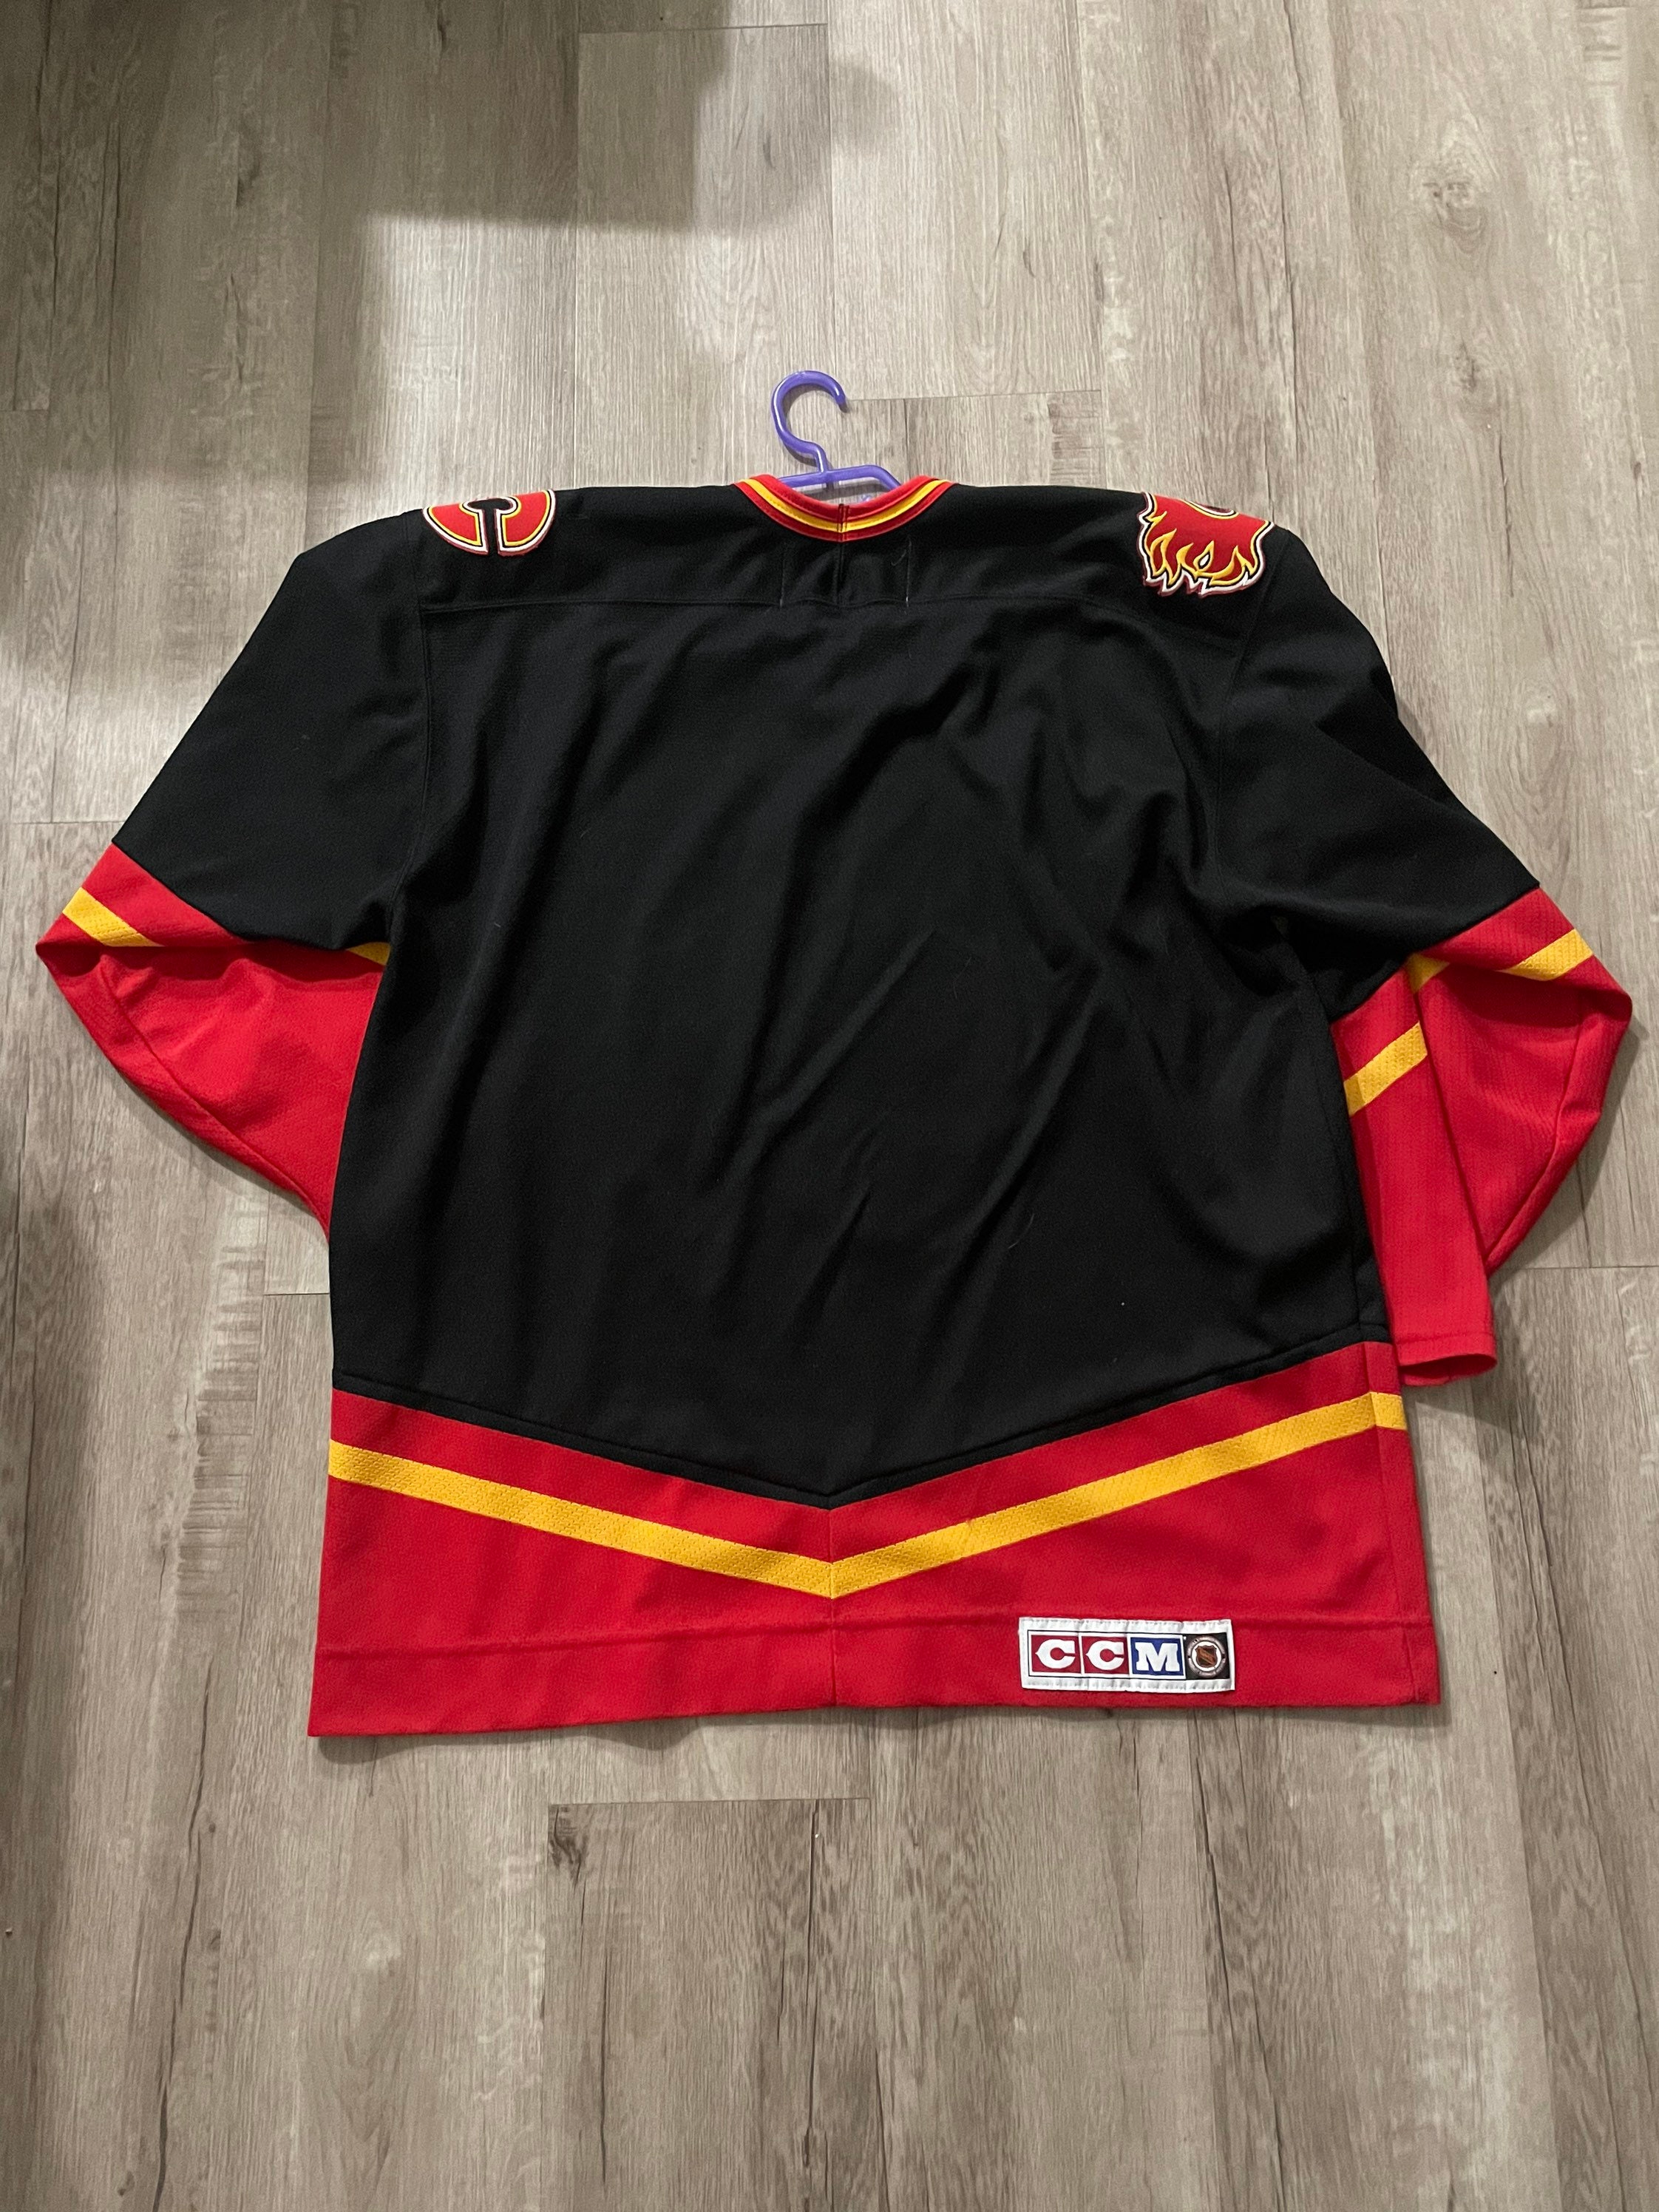 Flames announce 'Blasty' alternate jersey will be worn 12 times in 2022–23